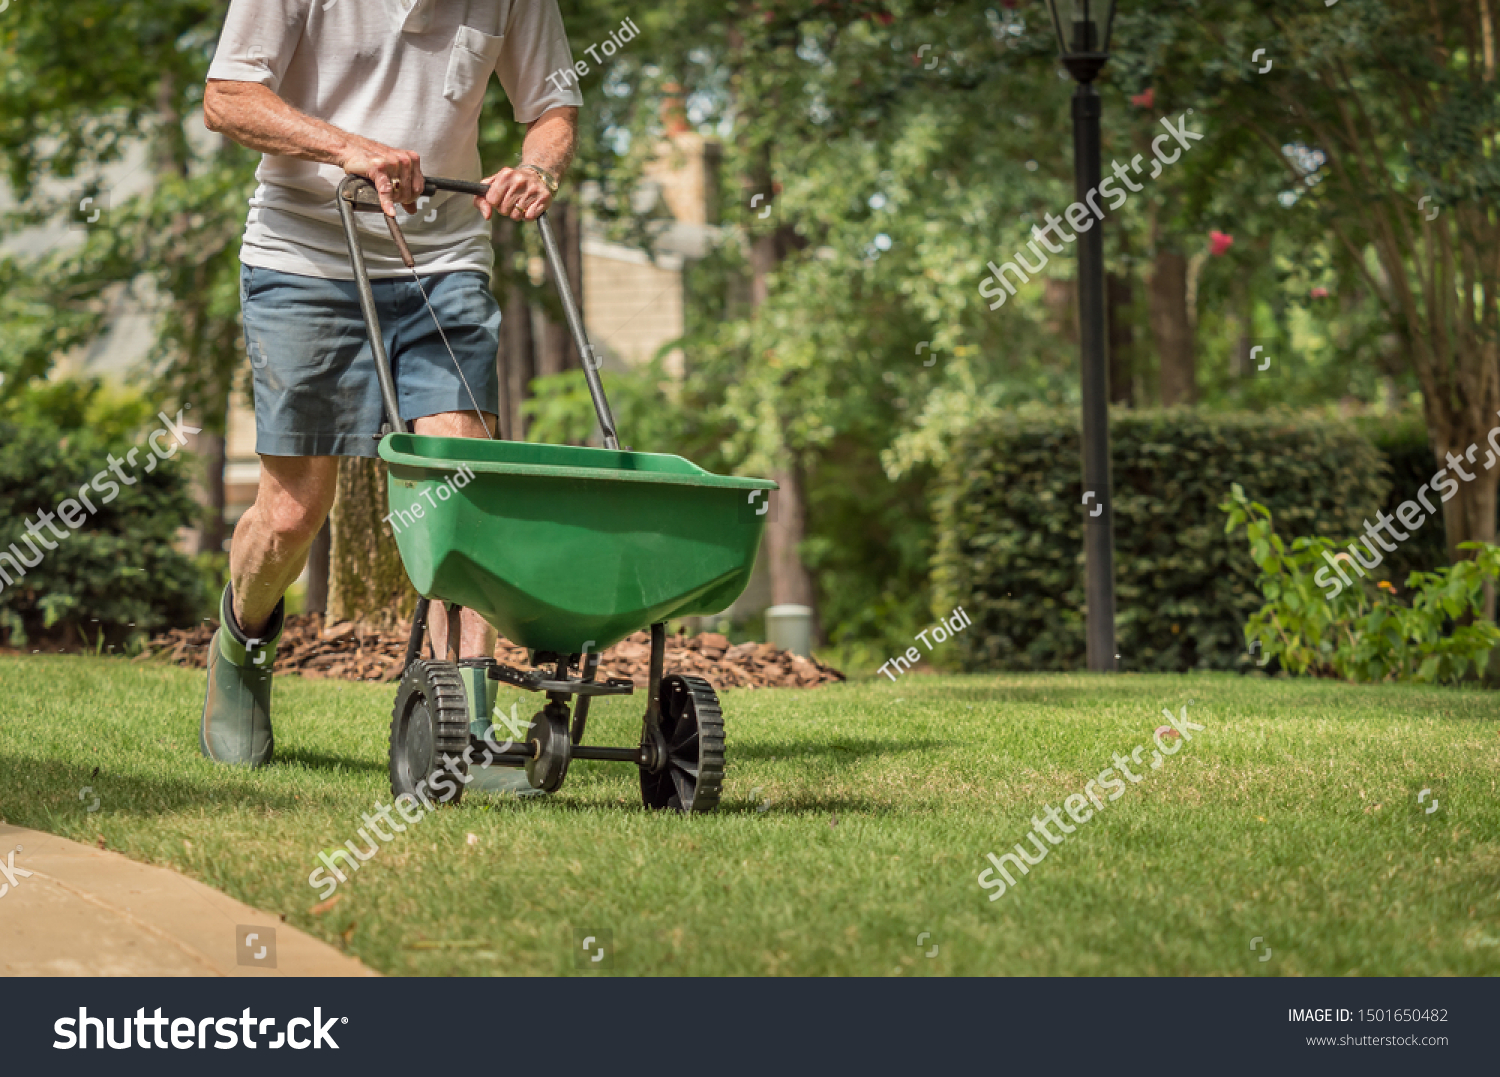 Man seeding and fertilizing residential backyard lawn with manual grass seed spreader. #1501650482